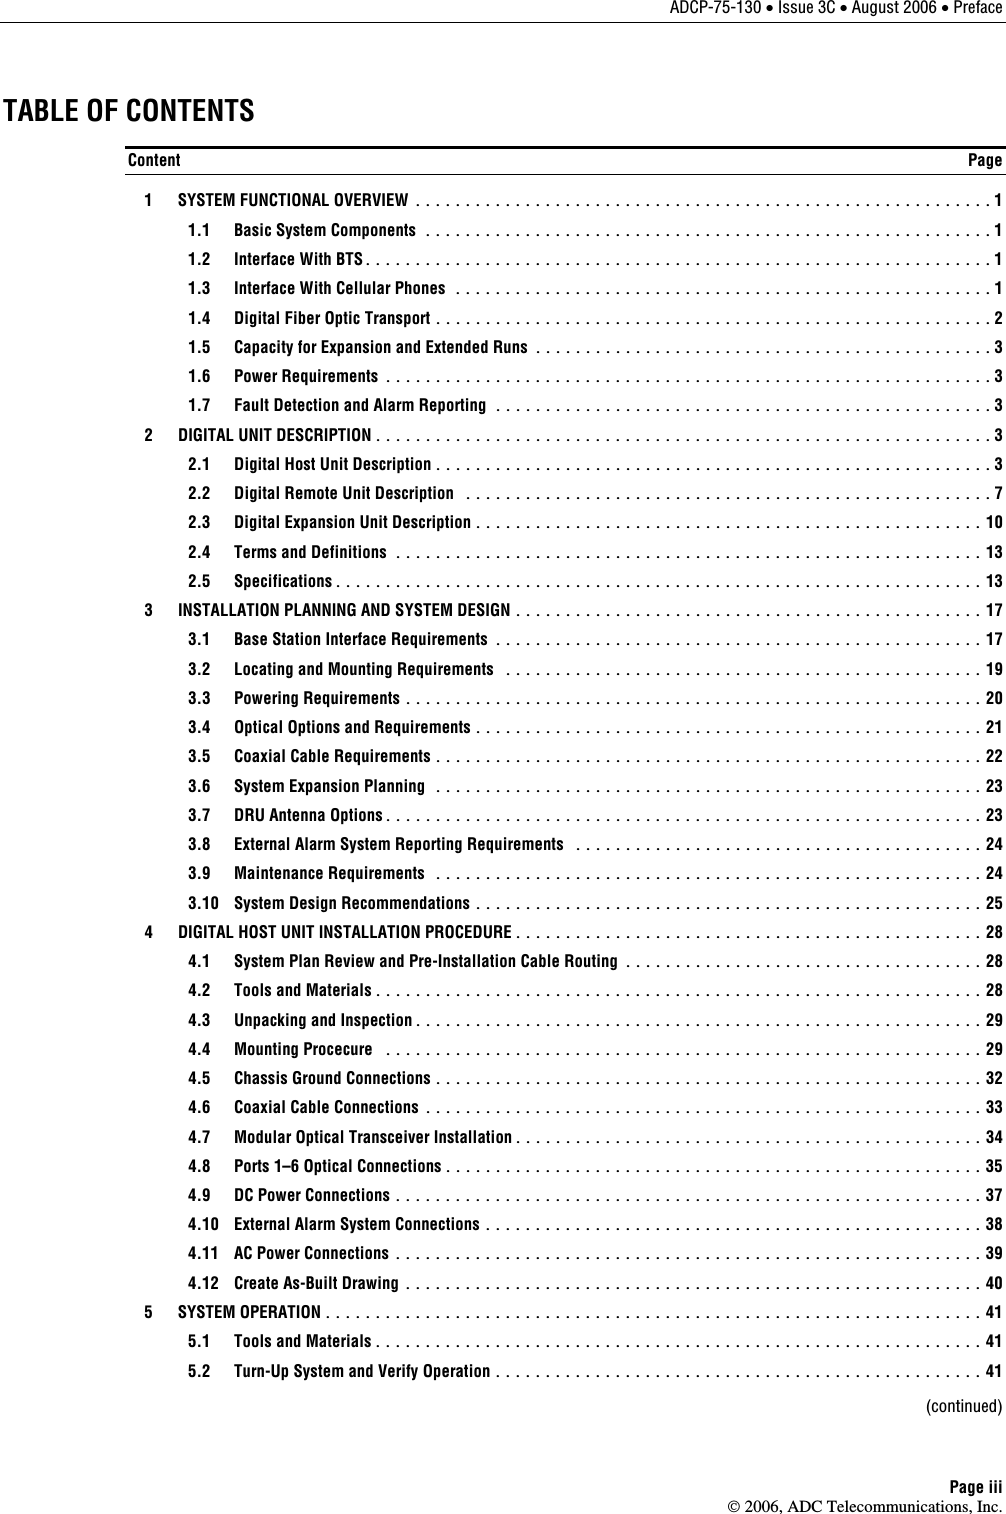 ADCP-75-130 • Issue 3C • August 2006 • Preface Page iii © 2006, ADC Telecommunications, Inc. TABLE OF CONTENTS Content  Page   1  SYSTEM FUNCTIONAL OVERVIEW .......................................................... 1   1.1  Basic System Components ......................................................... 1   1.2  Interface With BTS............................................................... 1   1.3  Interface With Cellular Phones ...................................................... 1   1.4  Digital Fiber Optic Transport ........................................................ 2   1.5  Capacity for Expansion and Extended Runs .............................................. 3  1.6 Power Requirements ............................................................. 3   1.7  Fault Detection and Alarm Reporting .................................................. 3   2  DIGITAL UNIT DESCRIPTION.............................................................. 3   2.1  Digital Host Unit Description........................................................ 3   2.2  Digital Remote Unit Description ..................................................... 7   2.3  Digital Expansion Unit Description................................................... 10   2.4  Terms and Definitions ........................................................... 13  2.5 Specifications................................................................. 13   3  INSTALLATION PLANNING AND SYSTEM DESIGN ............................................... 17   3.1  Base Station Interface Requirements ................................................. 17   3.2  Locating and Mounting Requirements ................................................ 19  3.3 Powering Requirements .......................................................... 20   3.4  Optical Options and Requirements................................................... 21   3.5  Coaxial Cable Requirements....................................................... 22   3.6  System Expansion Planning ....................................................... 23   3.7  DRU Antenna Options............................................................ 23   3.8  External Alarm System Reporting Requirements ......................................... 24  3.9 Maintenance Requirements ....................................................... 24   3.10  System Design Recommendations ................................................... 25   4  DIGITAL HOST UNIT INSTALLATION PROCEDURE............................................... 28   4.1  System Plan Review and Pre-Installation Cable Routing .................................... 28   4.2  Tools and Materials............................................................. 28   4.3  Unpacking and Inspection......................................................... 29  4.4 Mounting Procecure ............................................................ 29   4.5  Chassis Ground Connections ....................................................... 32   4.6  Coaxial Cable Connections ........................................................ 33   4.7  Modular Optical Transceiver Installation............................................... 34   4.8  Ports 1–6 Optical Connections...................................................... 35   4.9  DC Power Connections ........................................................... 37   4.10  External Alarm System Connections .................................................. 38   4.11  AC Power Connections ........................................................... 39   4.12  Create As-Built Drawing .......................................................... 40  5  SYSTEM OPERATION.................................................................. 41   5.1  Tools and Materials............................................................. 41   5.2  Turn-Up System and Verify Operation ................................................. 41  (continued) 